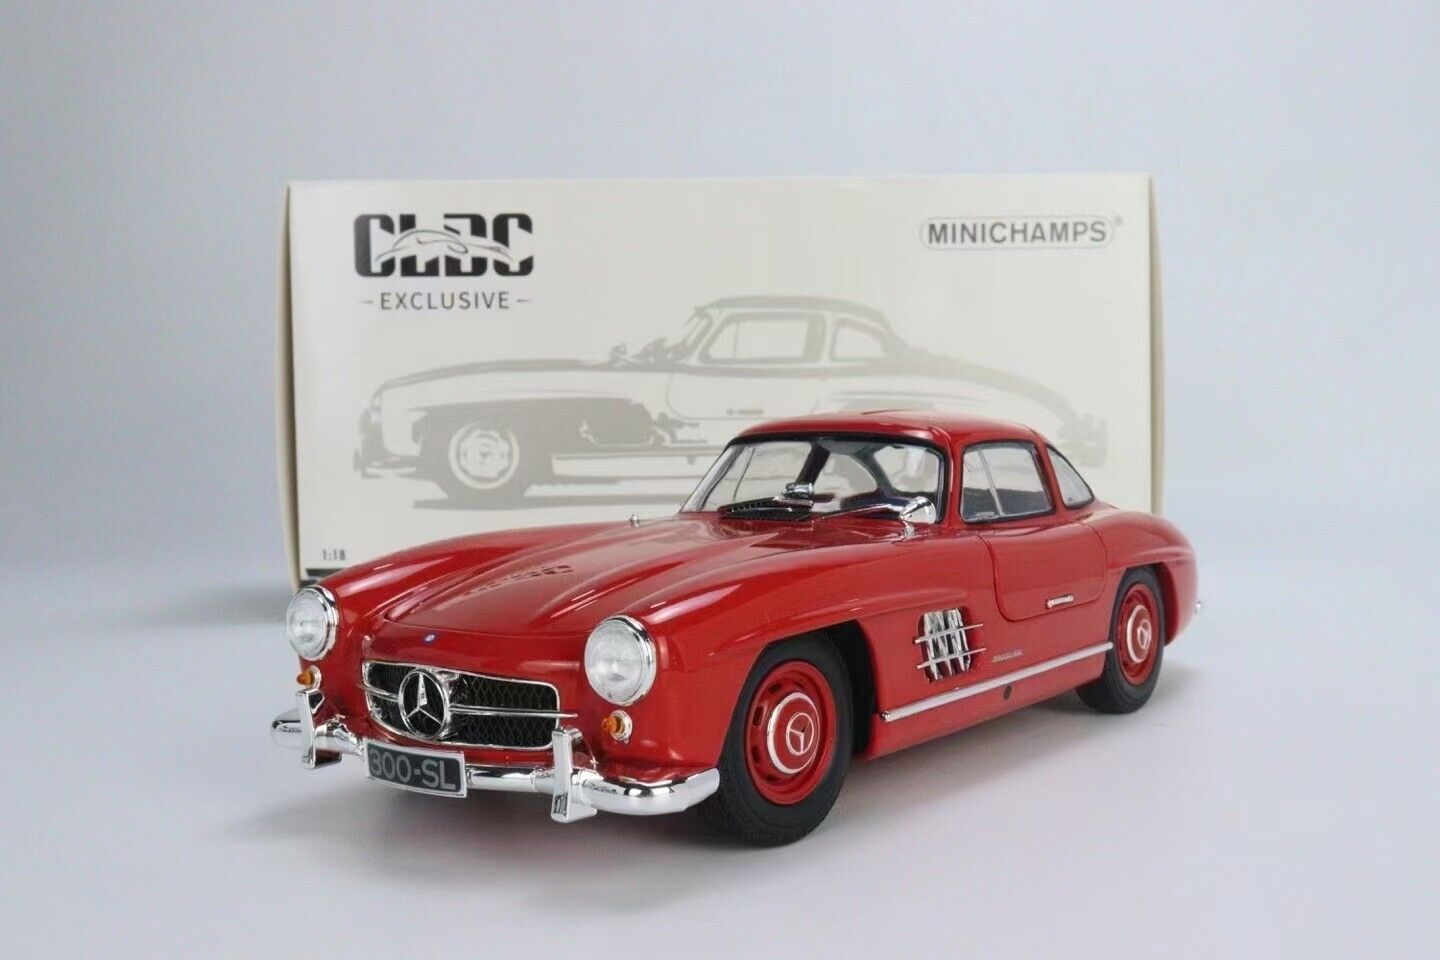 MINICHAMPS迷你切 1：18 奔驰 MERCEDES BENZ 300SL  Alloy Car model limited edition RED